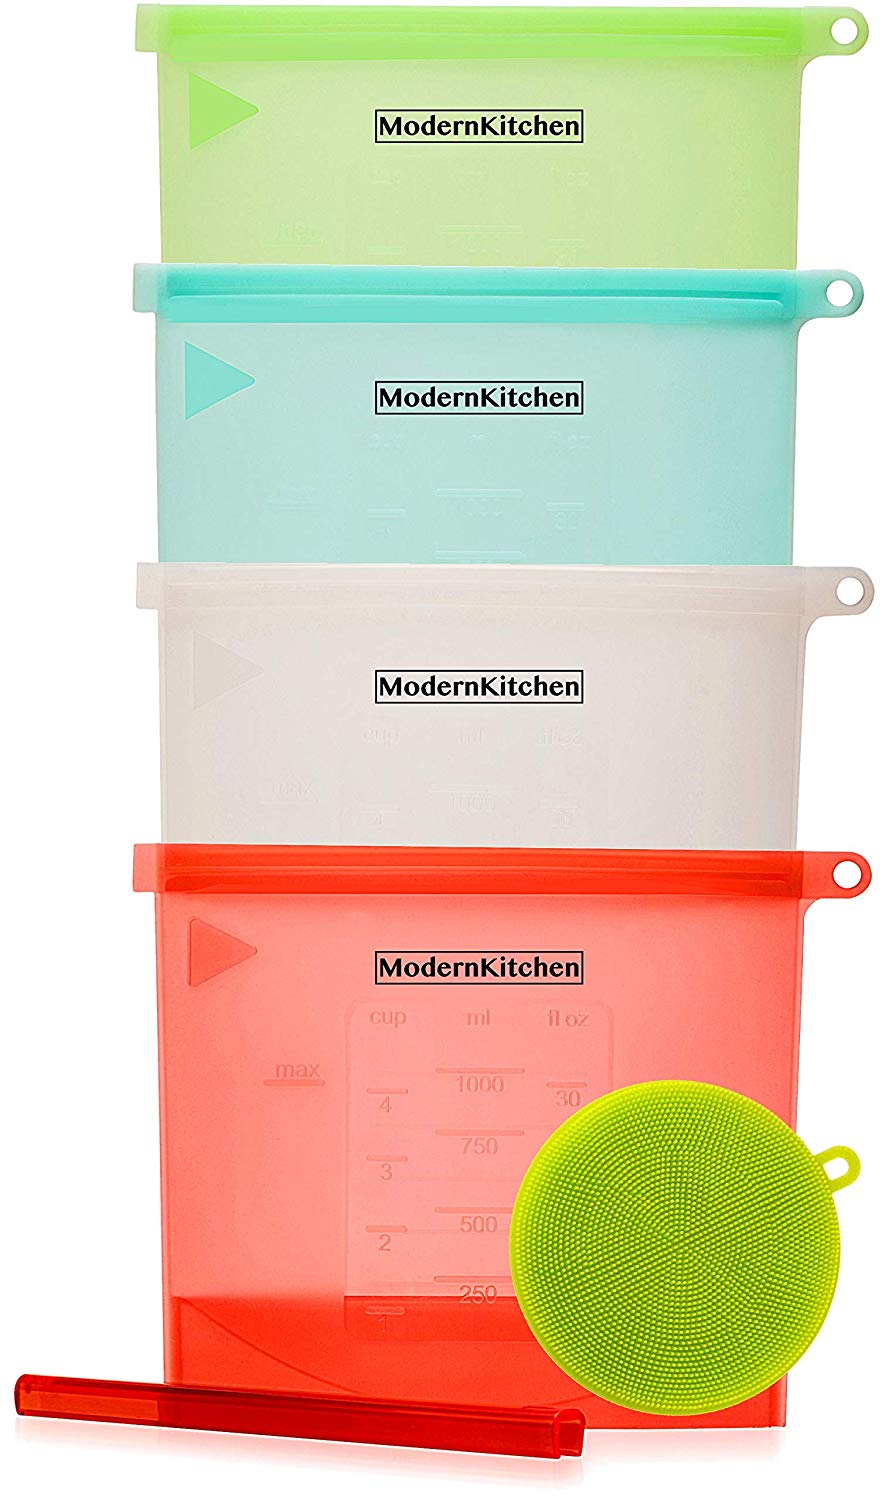 ModernKitchen Reusable Silicone Food Storage Bags with Reusable Scrubber Sponge - Eco Friendly Sandwich, Snack Bag, Dishwasher Safe, Quart Size (4pack+1)